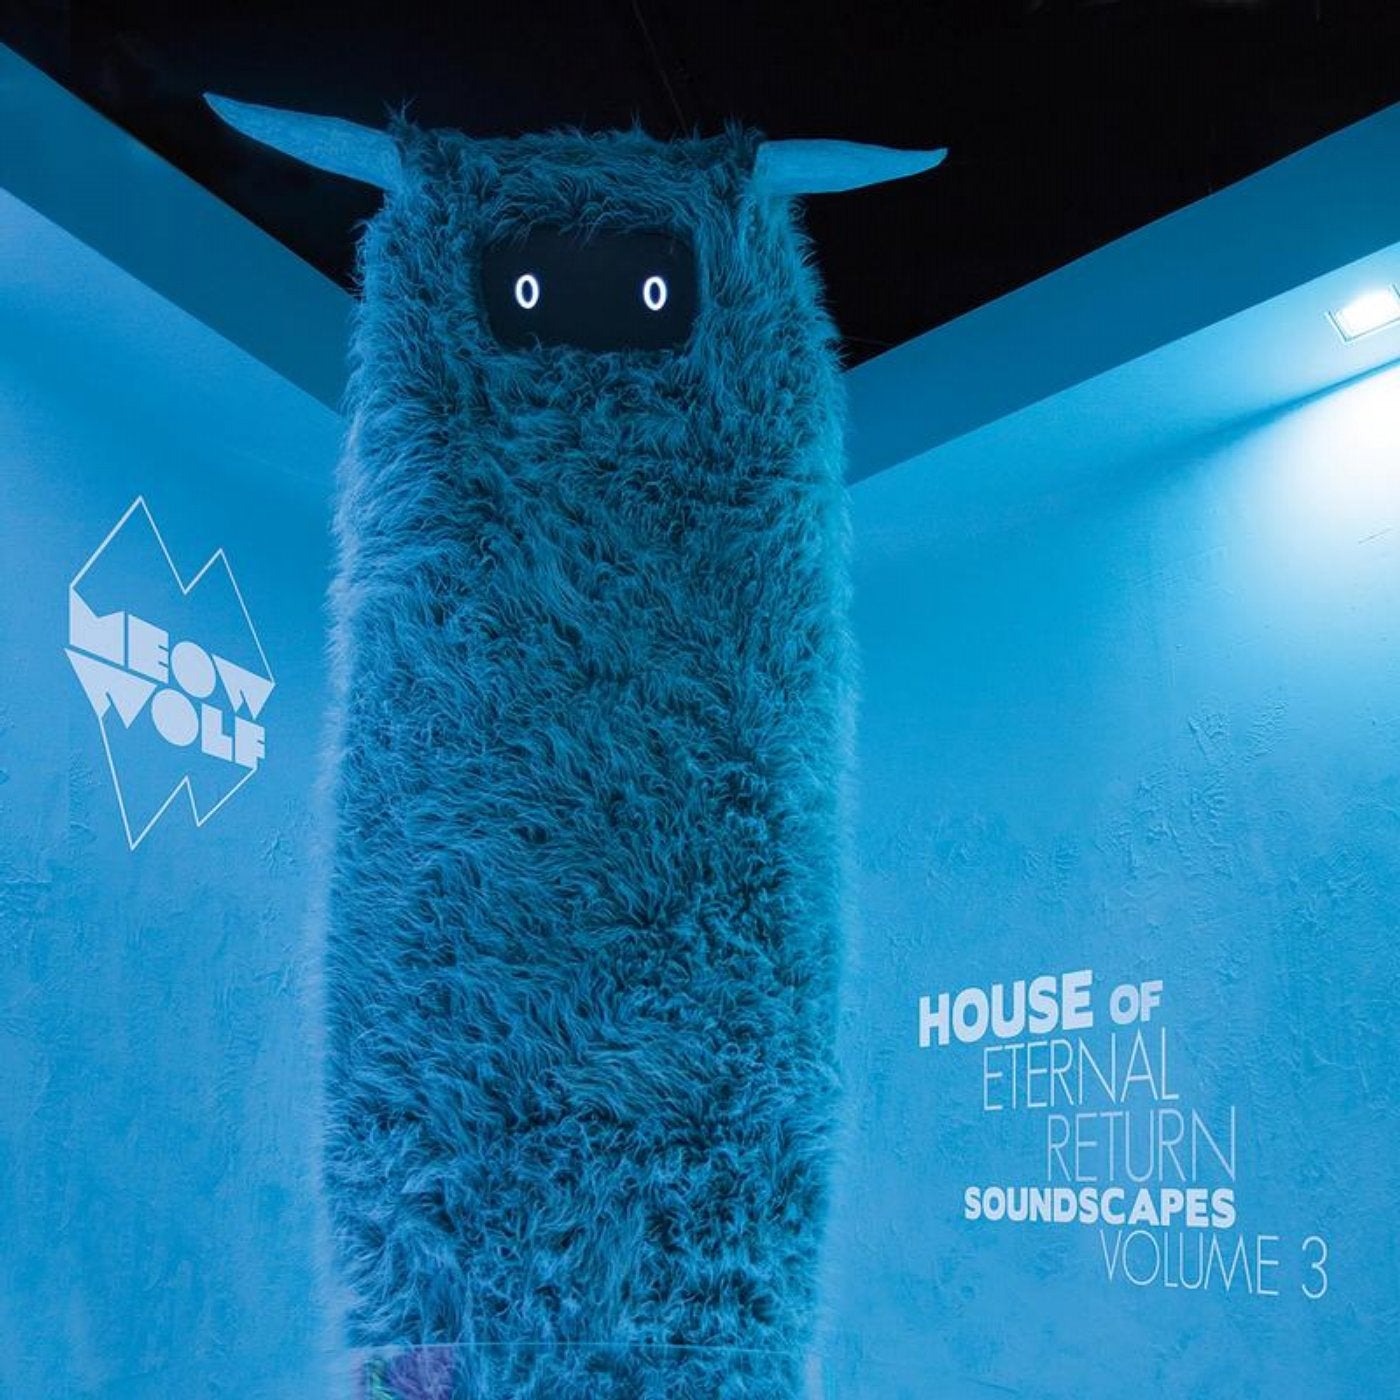 Meow Wolf's House of Eternal Return: Soundscapes Vol. 3